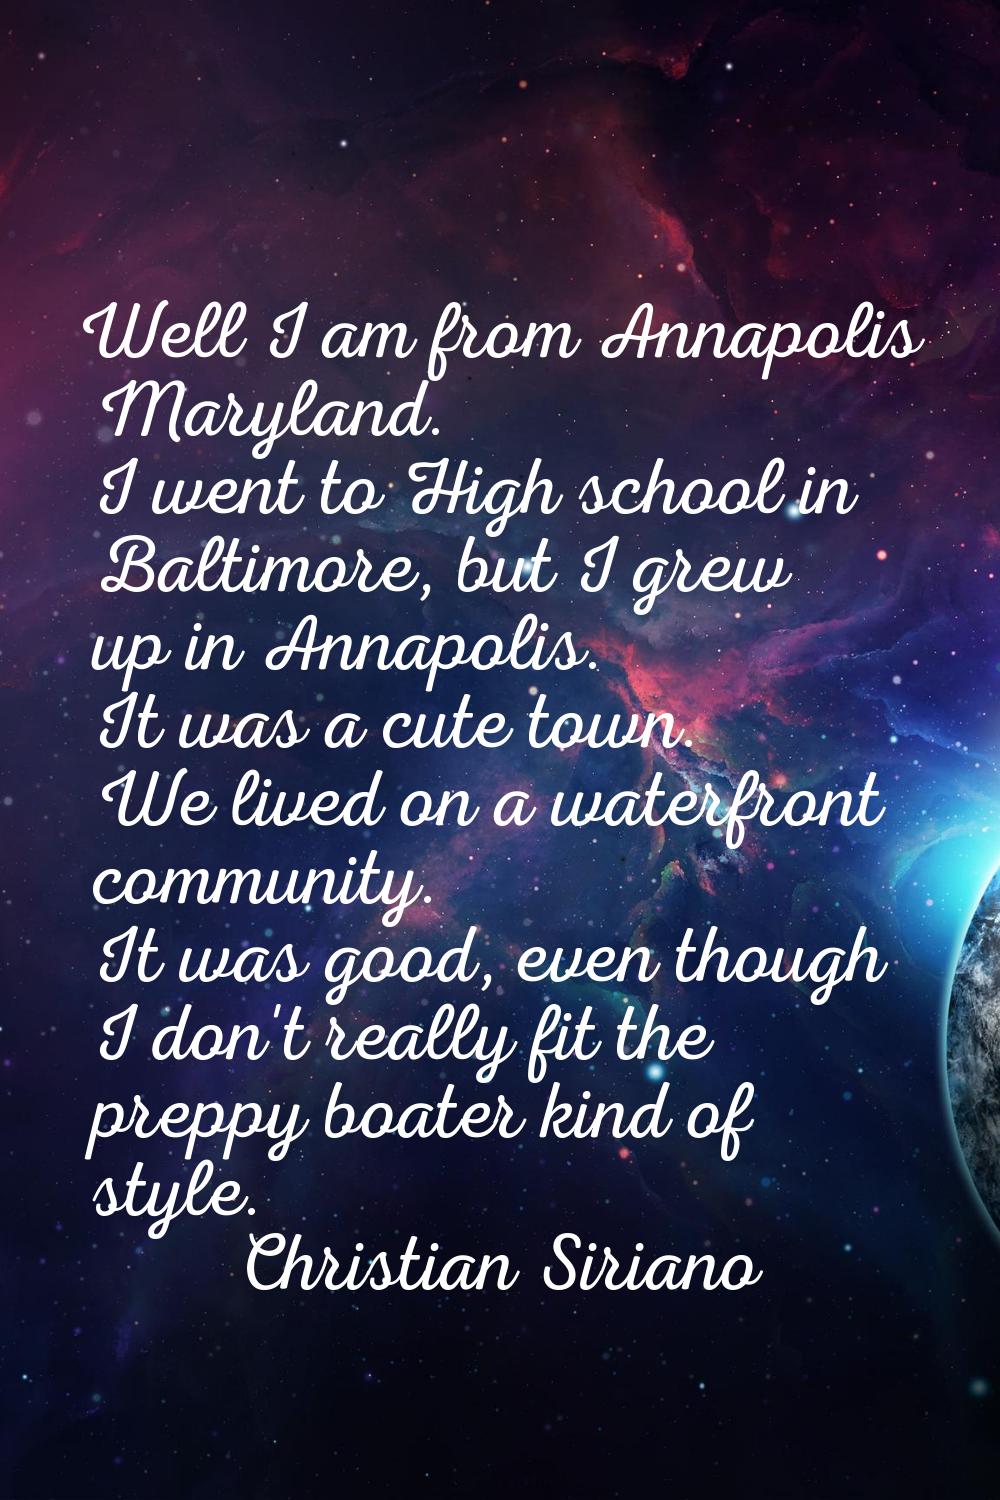 Well I am from Annapolis Maryland. I went to High school in Baltimore, but I grew up in Annapolis. 